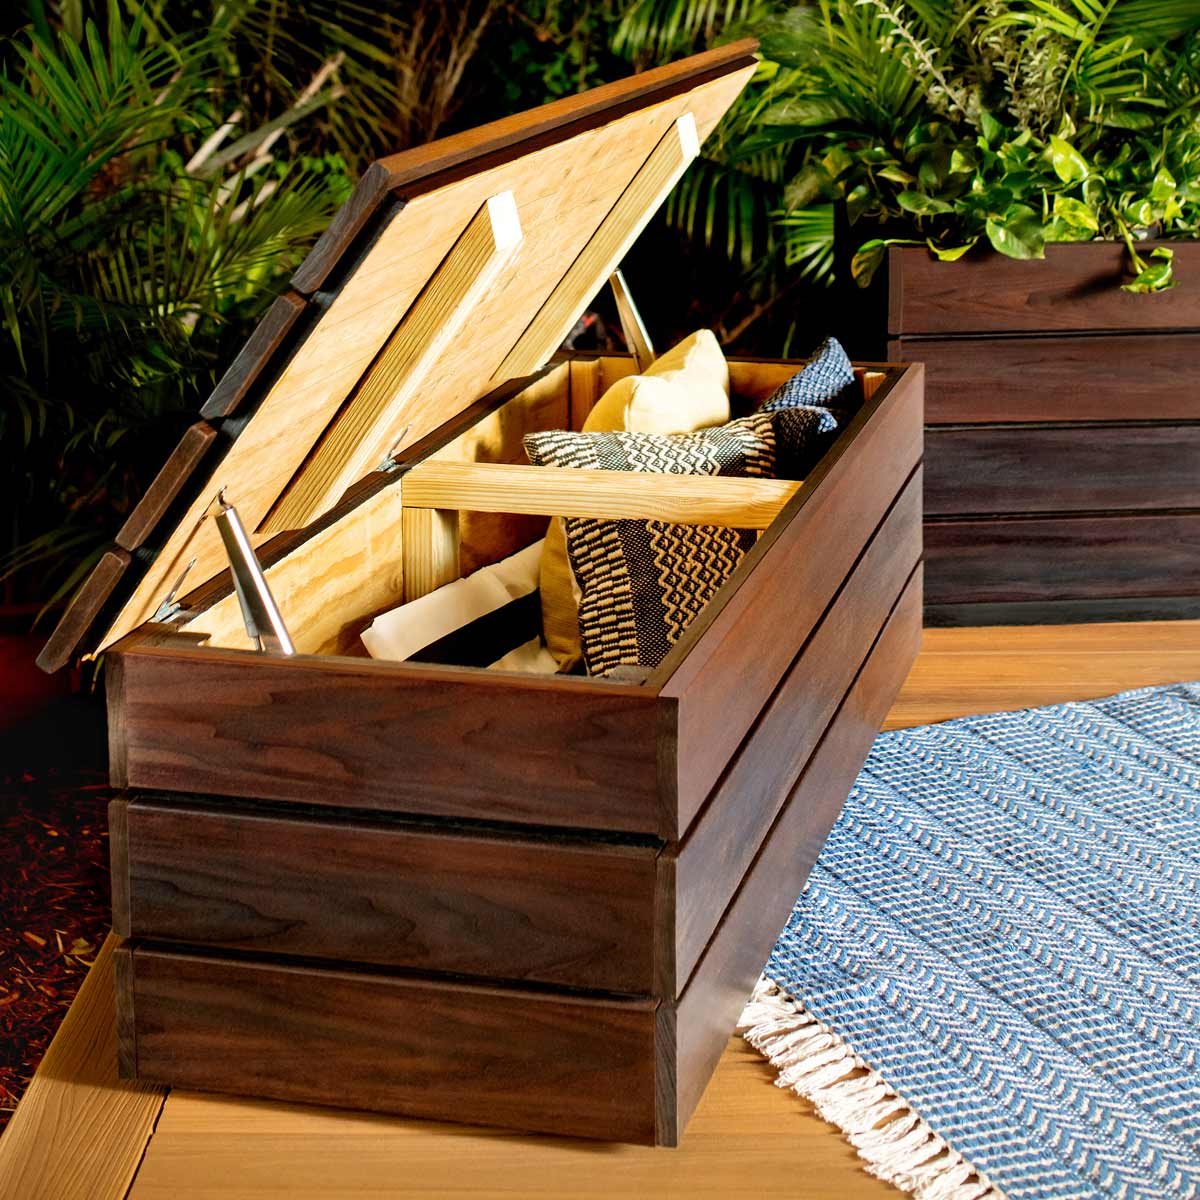 Build An Outdoor Storage Bench Diy, Outdoor Wood Storage Bench Plans Free